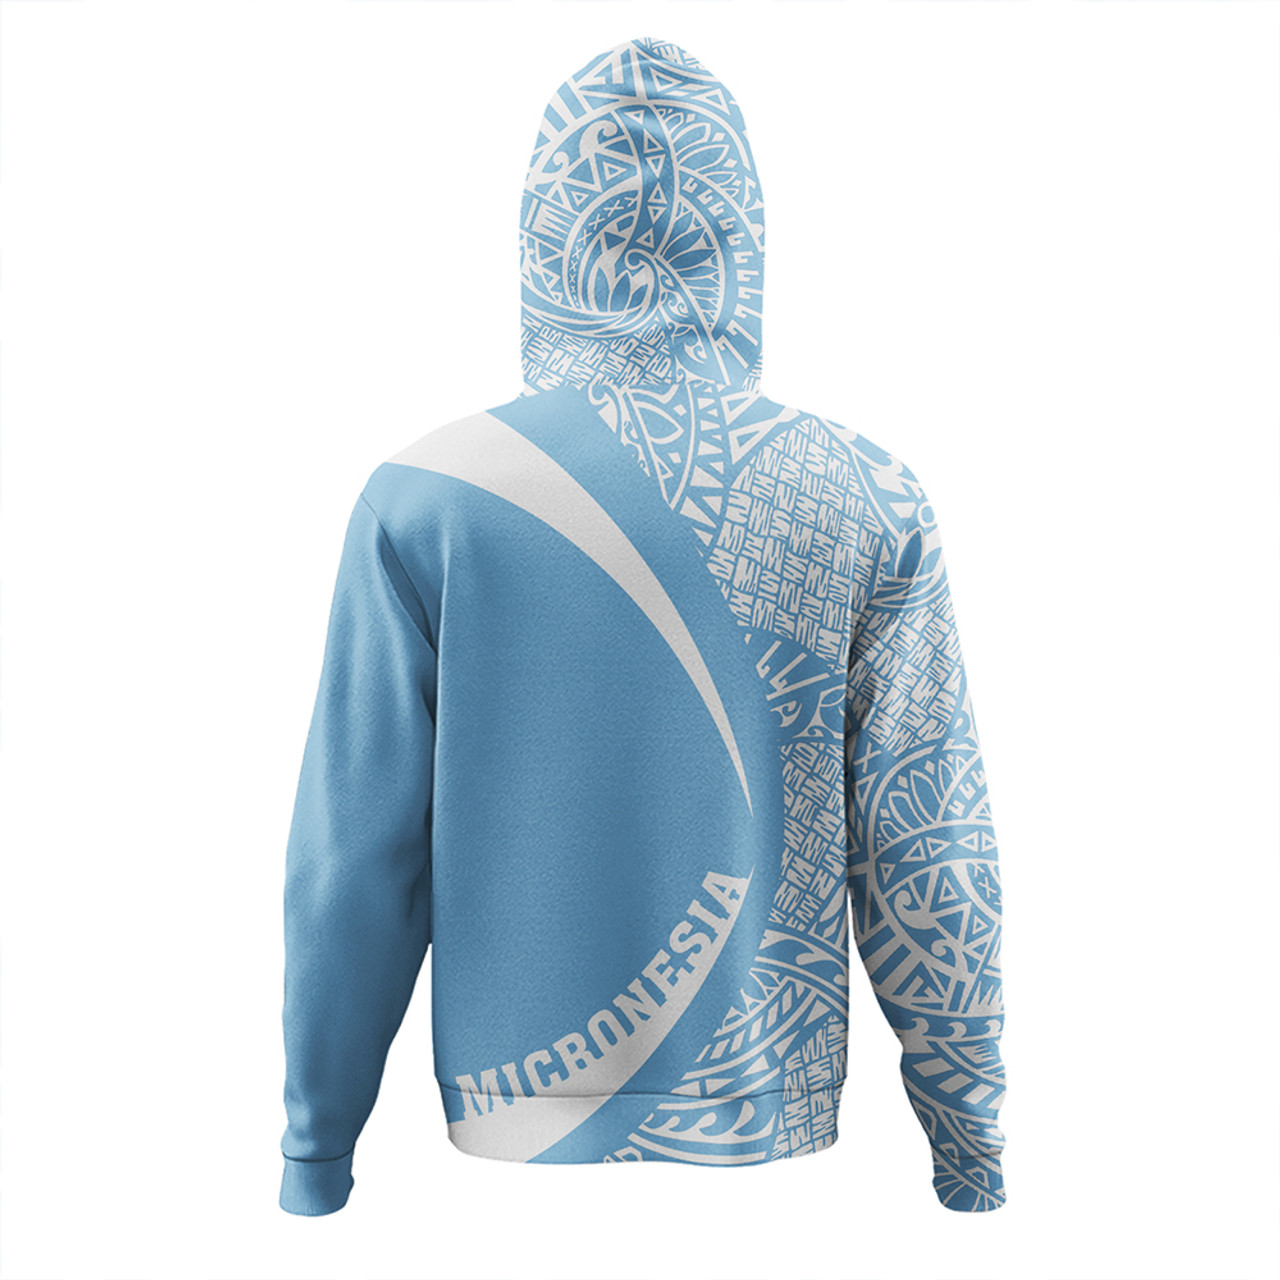 Federated States of Micronesia Hoodie Coat Of Arm Lauhala Circle